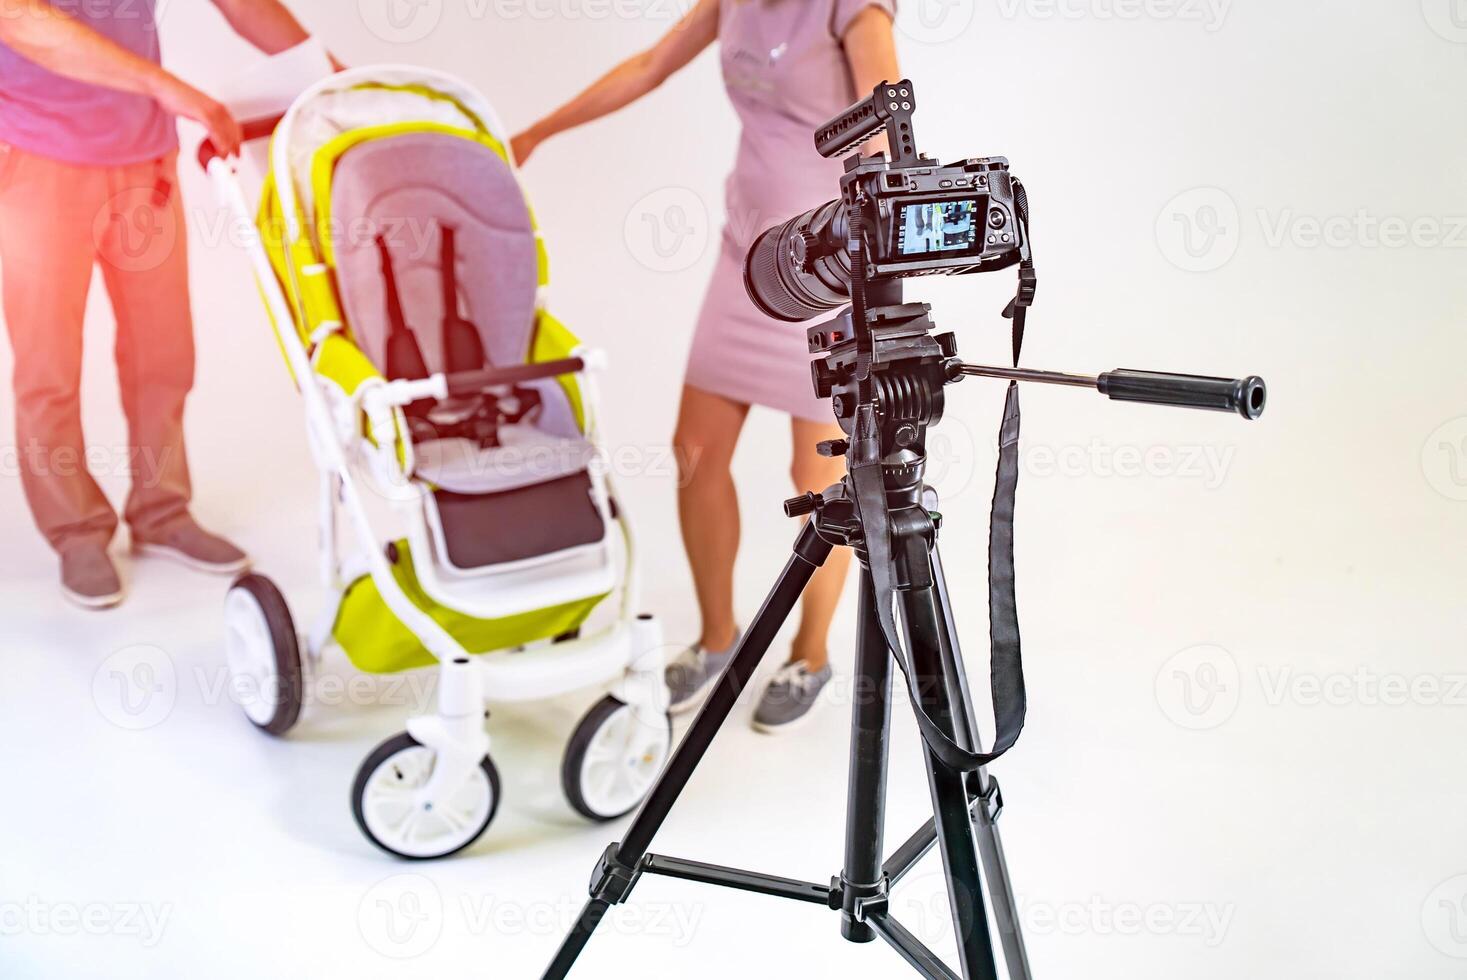 Making video in light studio for baby carriage. Camera standing in the photo studio.